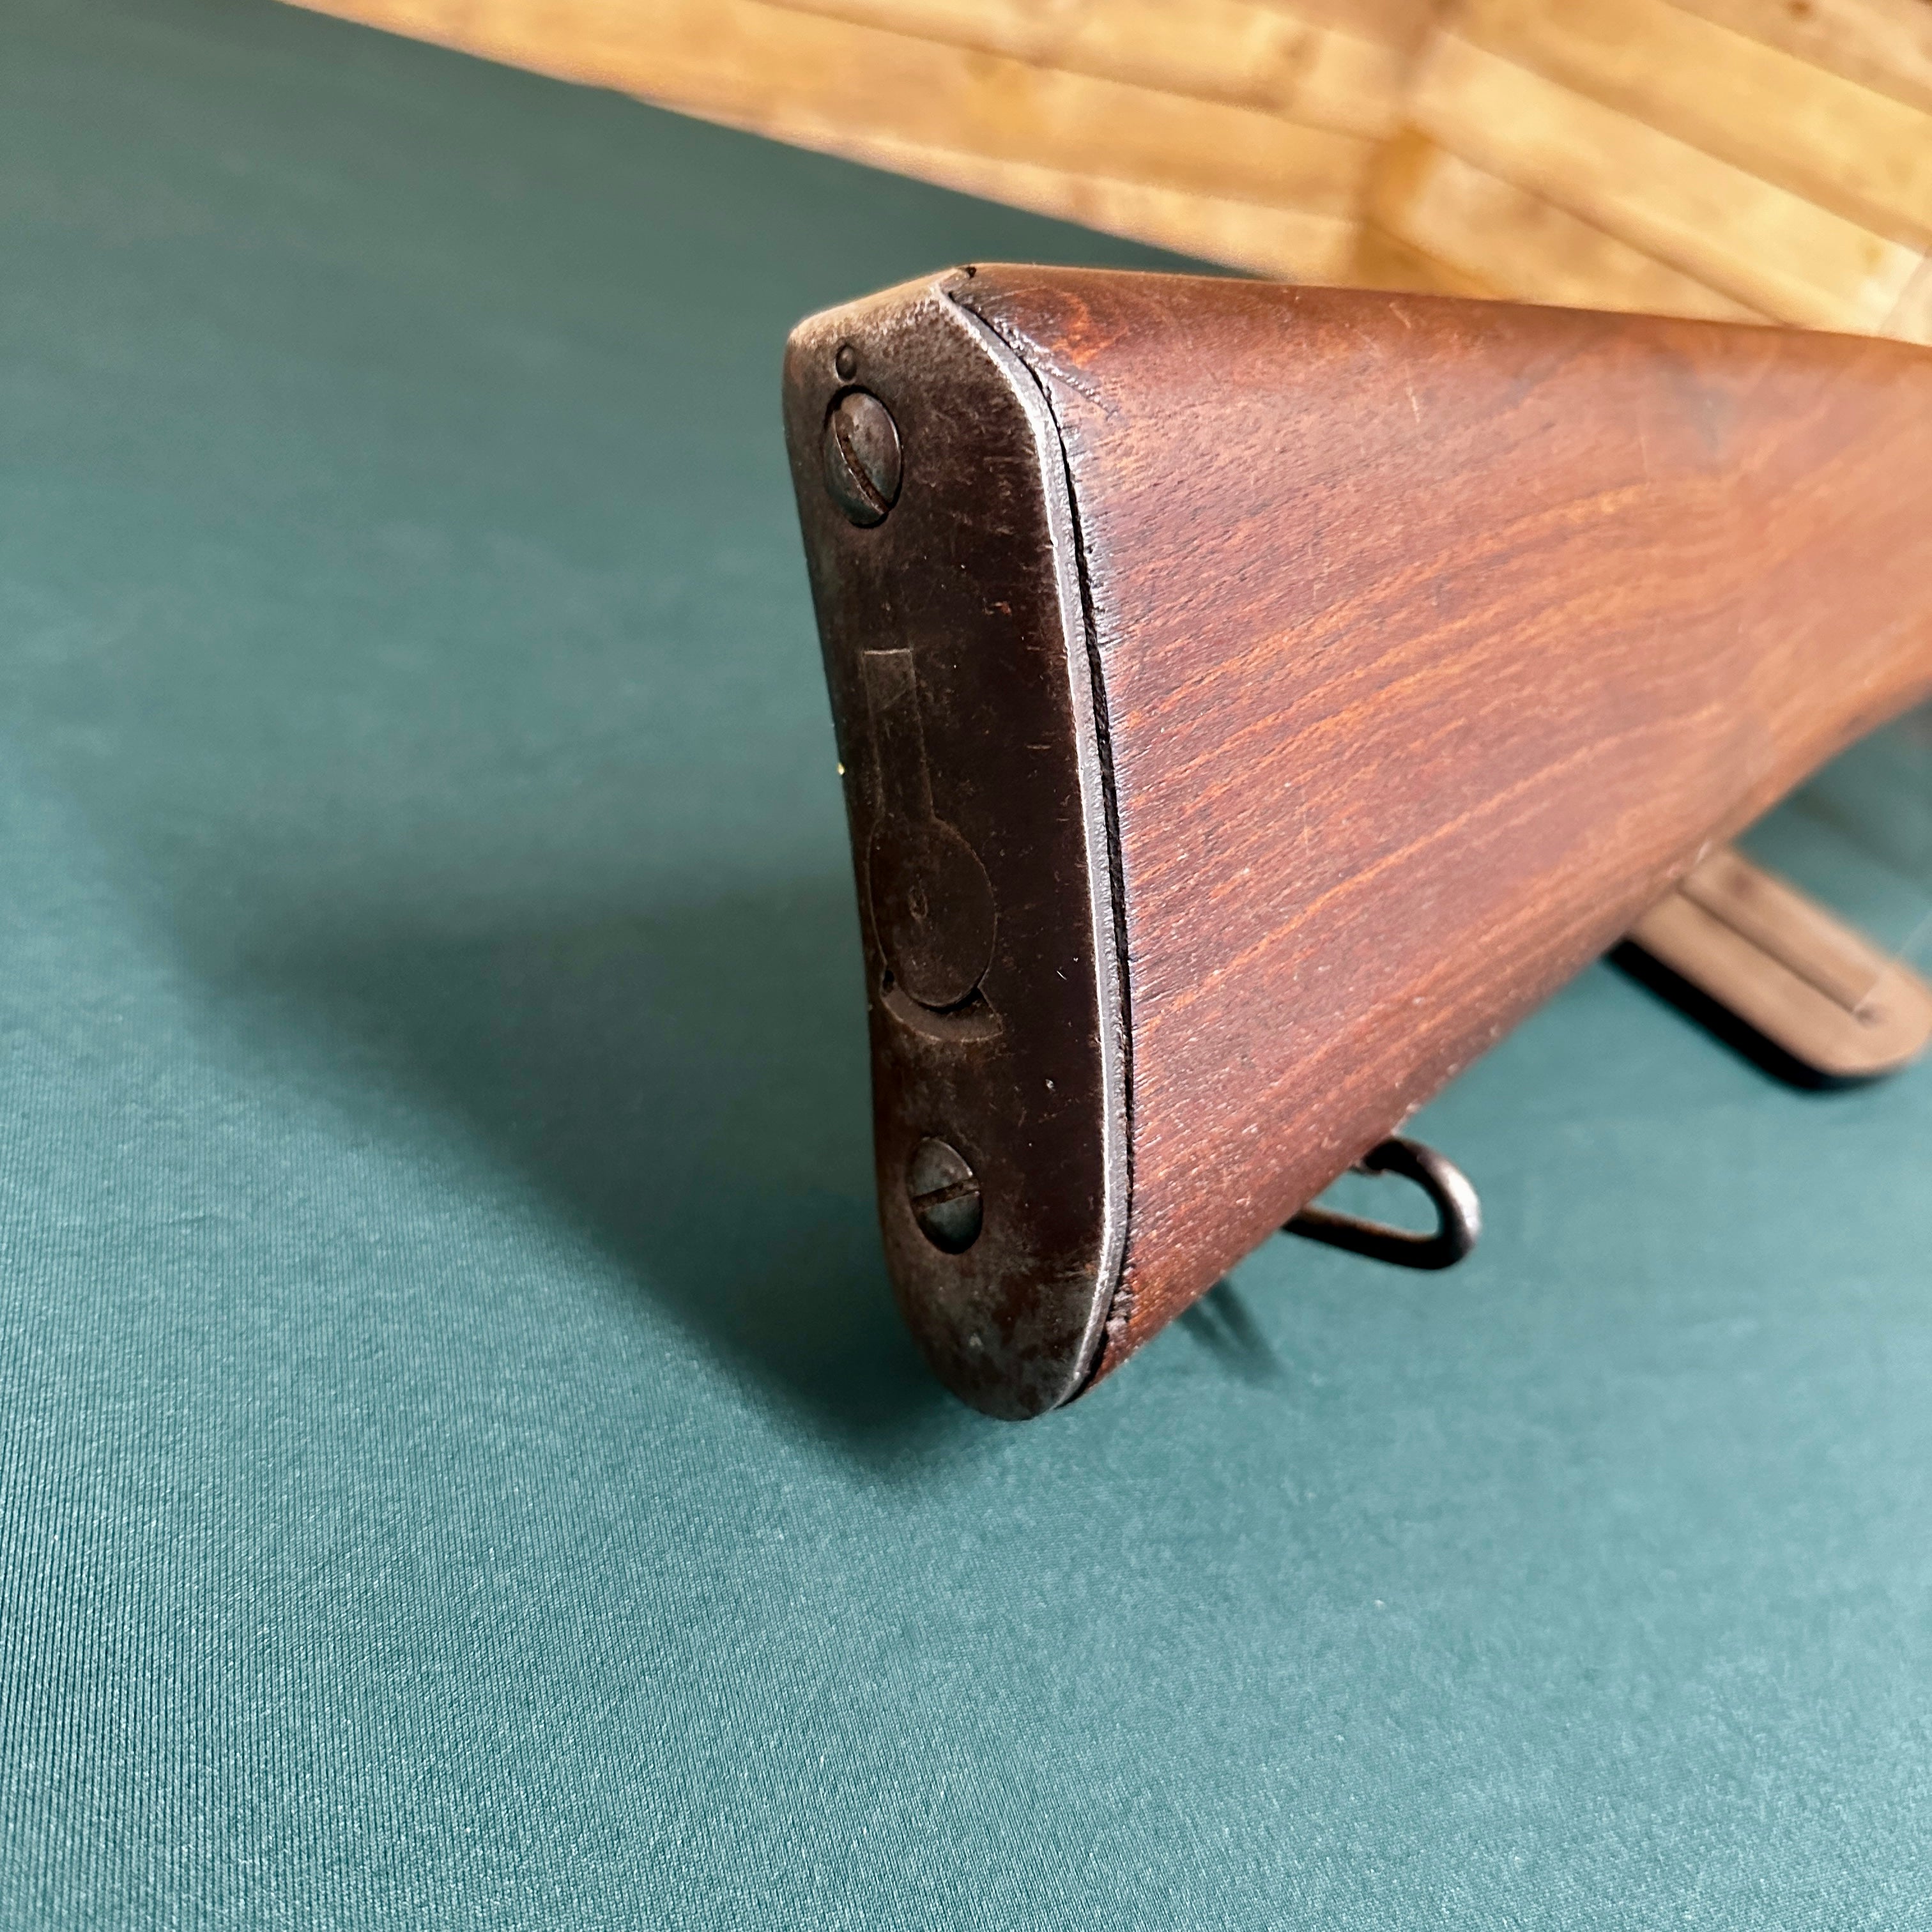 Longbranch .303 No.4 Mk1* Rifle - Contact to Purchase